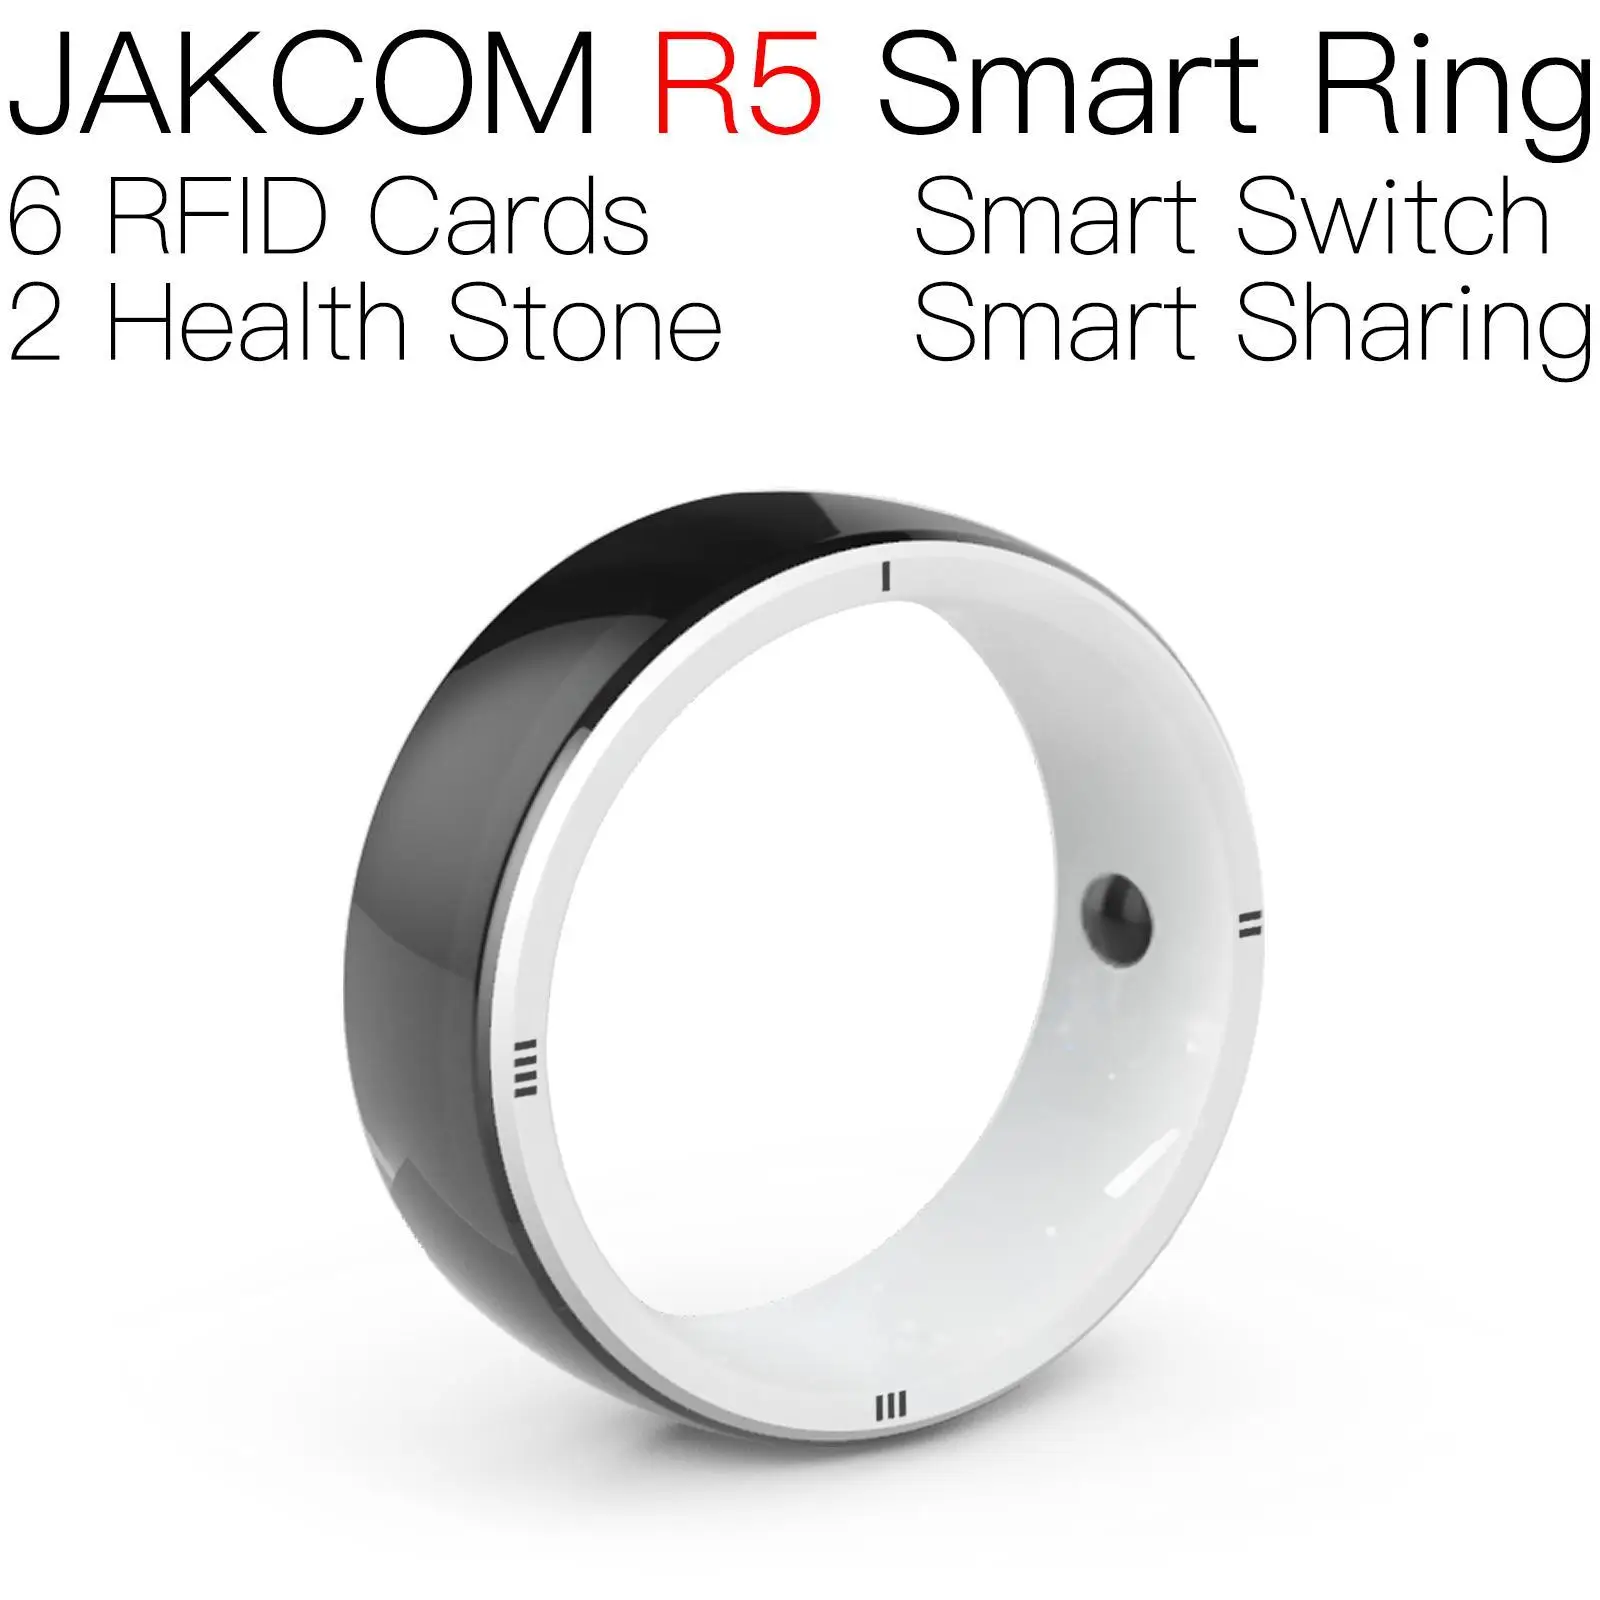 

JAKCOM R5 Smart Ring New arrival as rfid id oumeige store watch key ring mf card uid smart ic m1 gps chip for label sticker